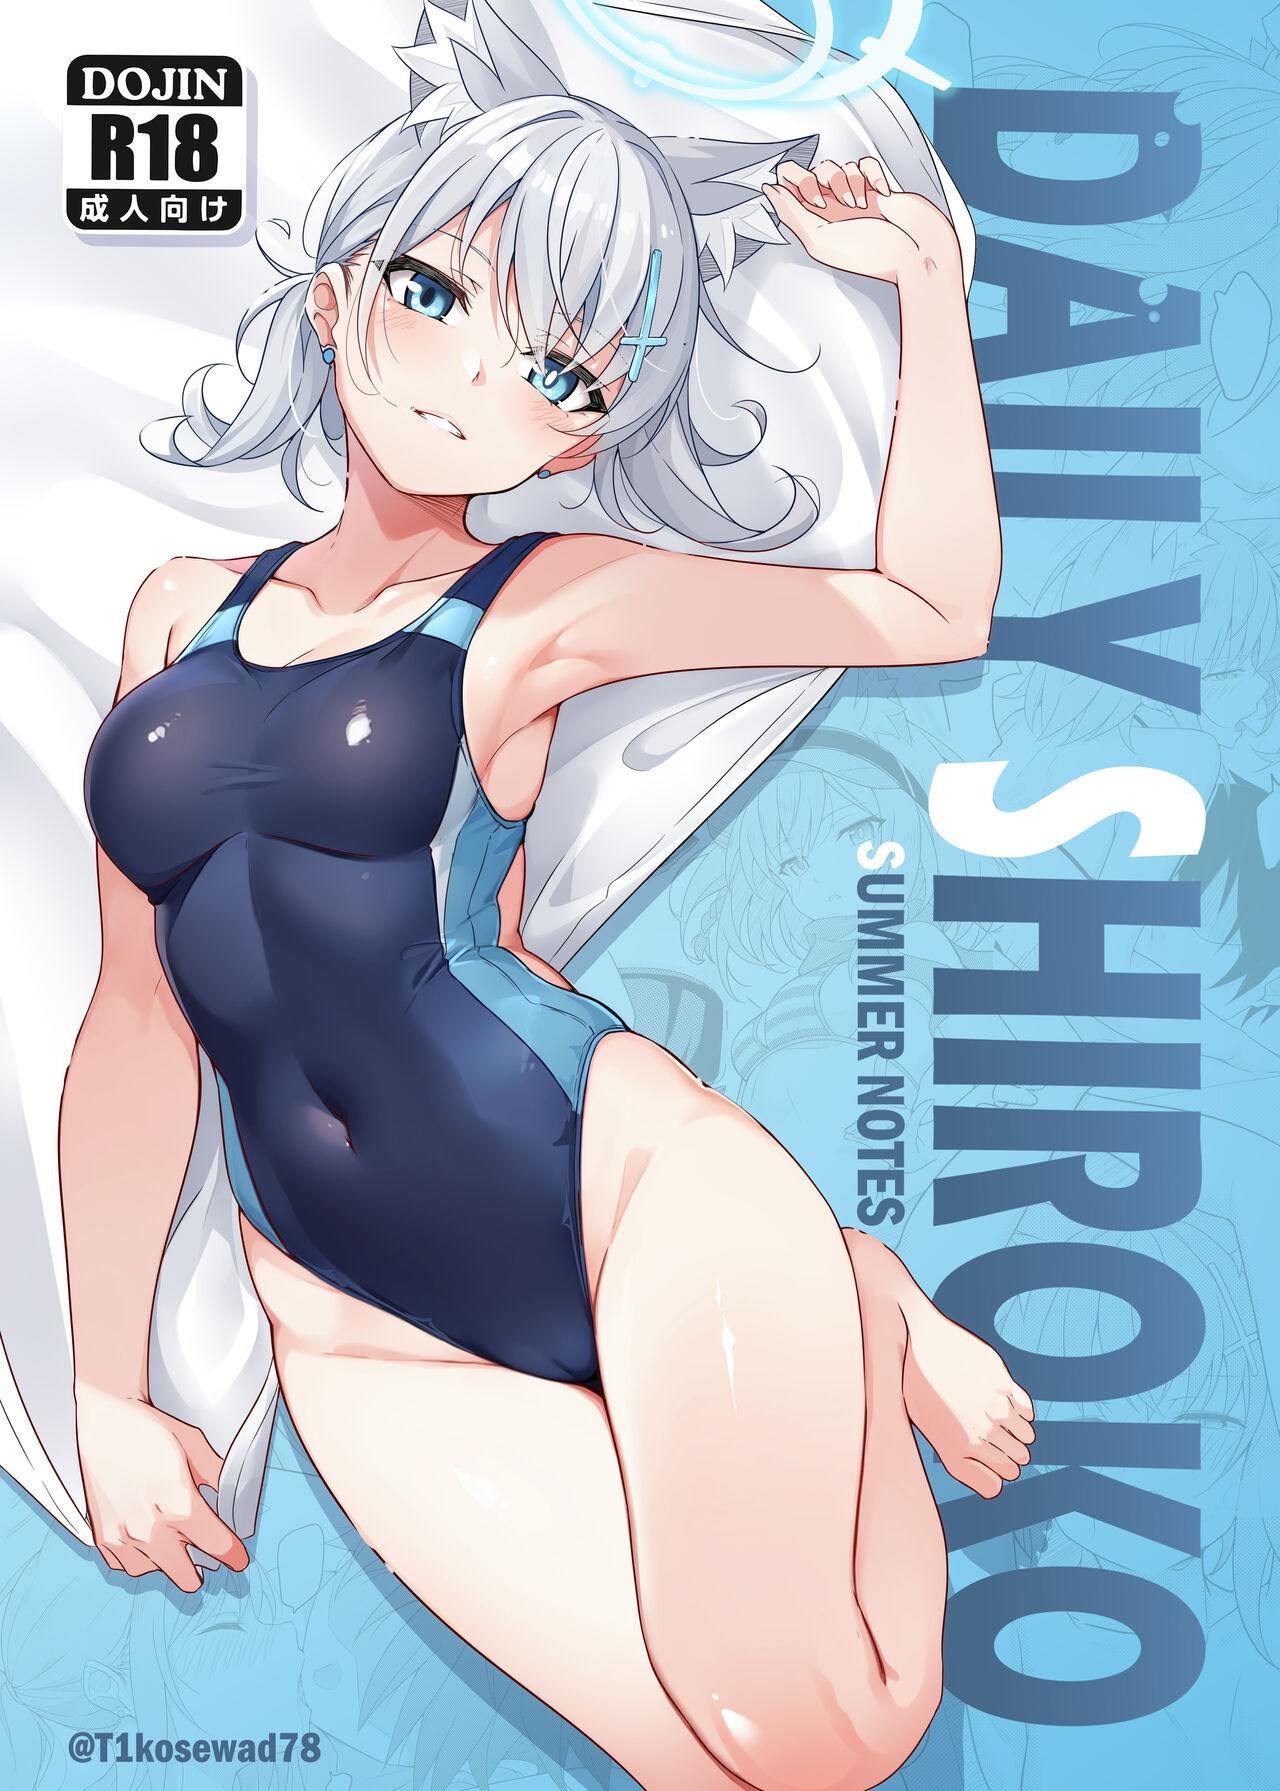 Daily Shiroko Summer Notes [T1kosewad] (Blue Archive) 0